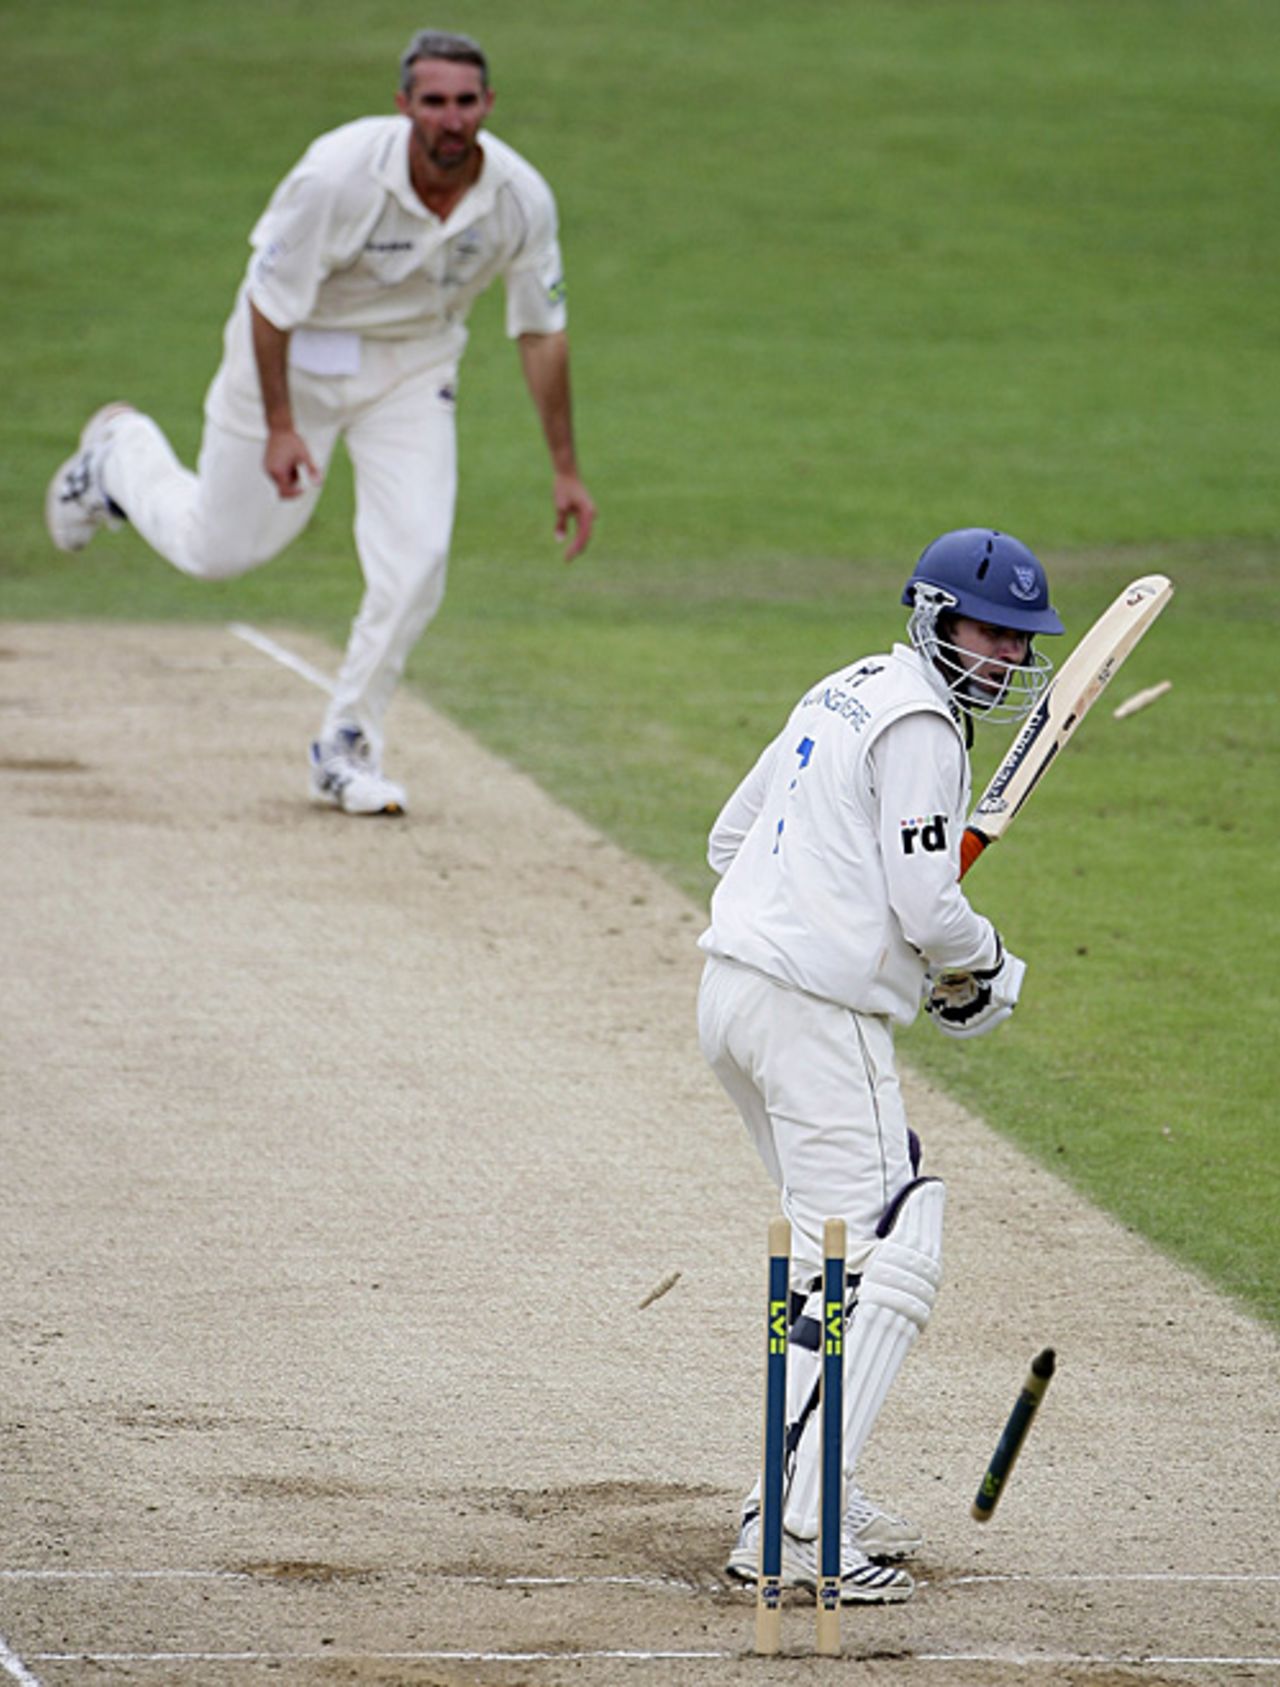 Richard Montgomerie is bowled by Jason Gillespie, Yorkshire v Sussex, County Championship, Headingley, June 18, 2007